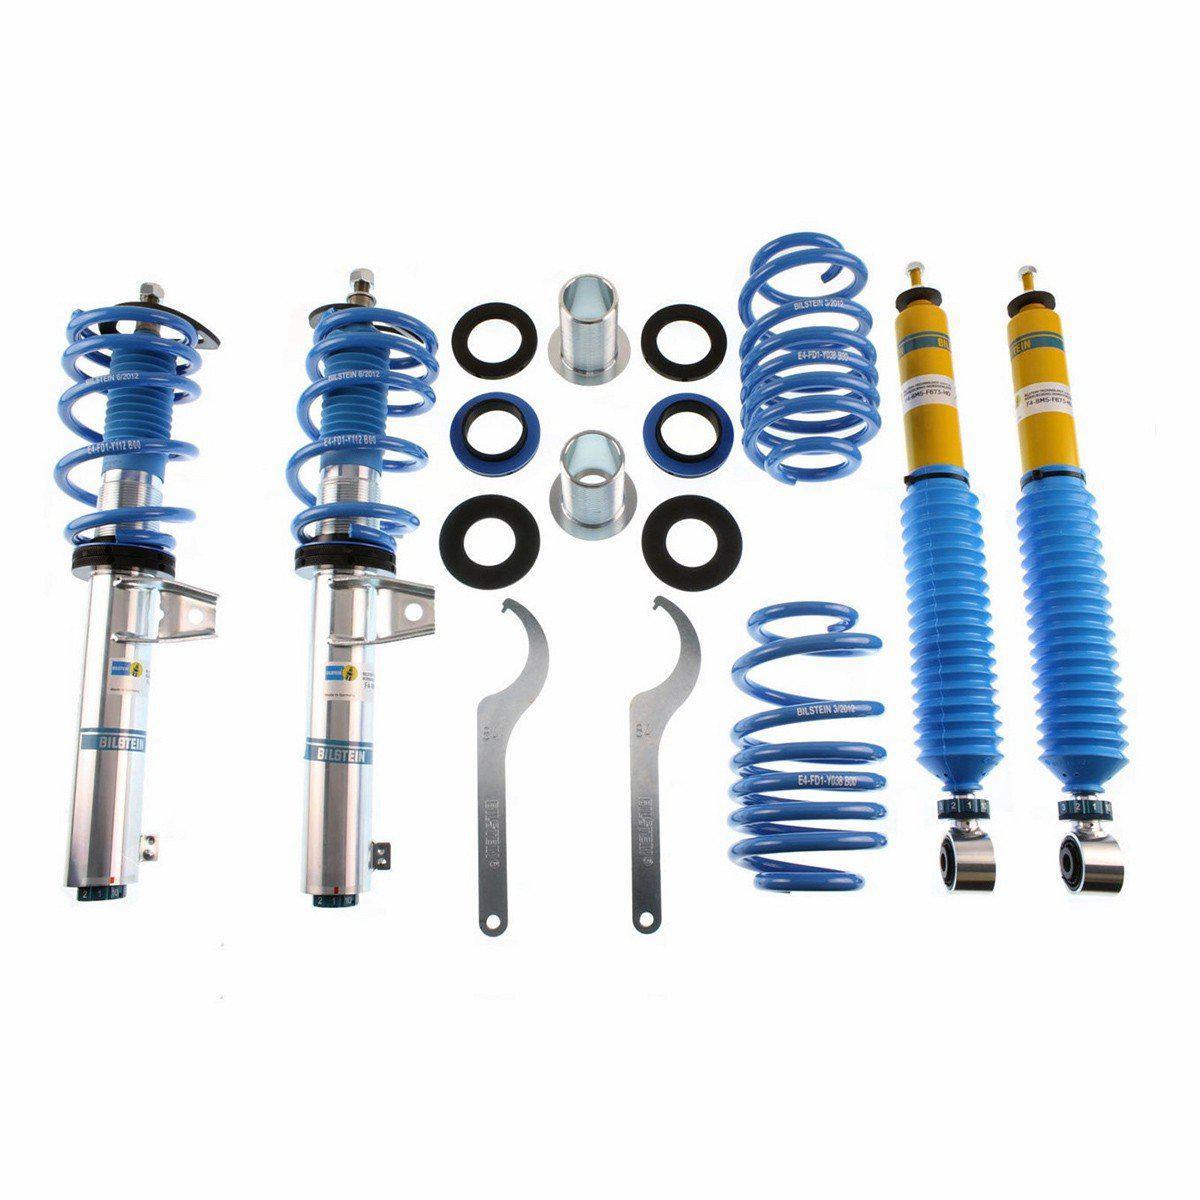 Bilstein Pss10 MQB (8V) Audi A3/S3 &amp; MKVII Volkswagen Golf/GTI/R Coilover Suspension Kit-A Little Tuning Co